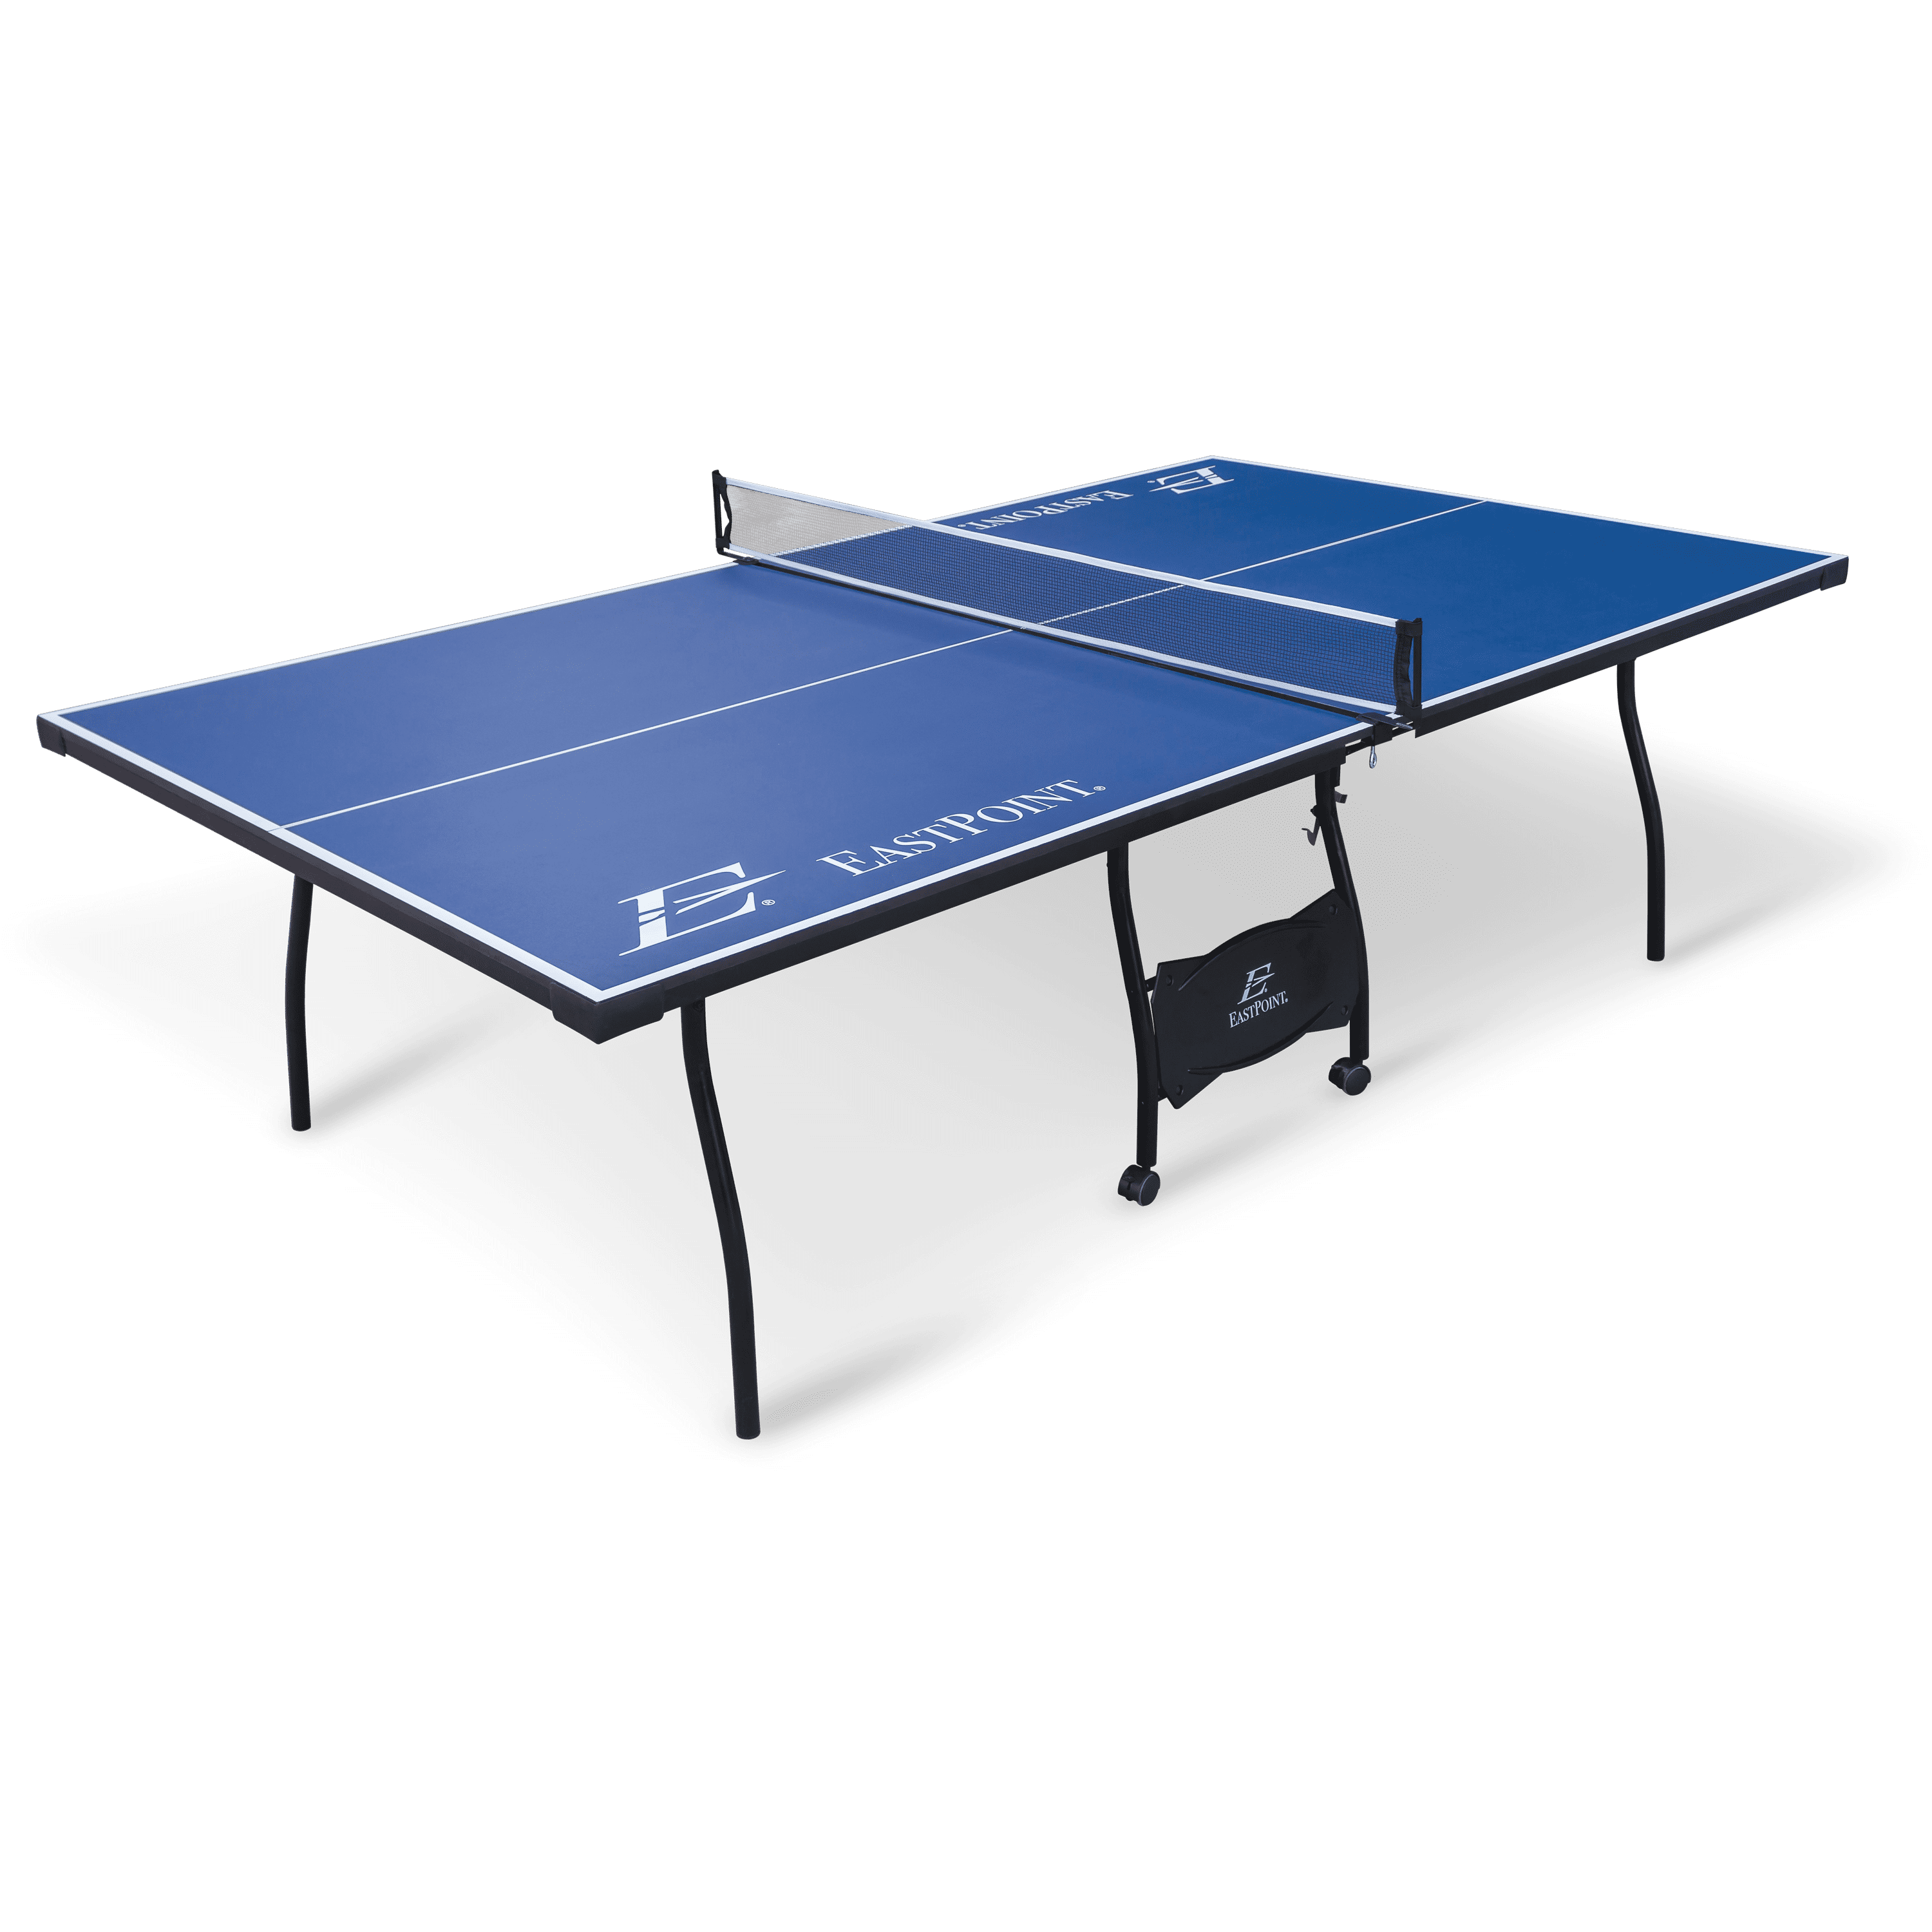 ESPN Official Size 2 Piece 15mm Indoor Quick Match Table Tennis Table, Blue  